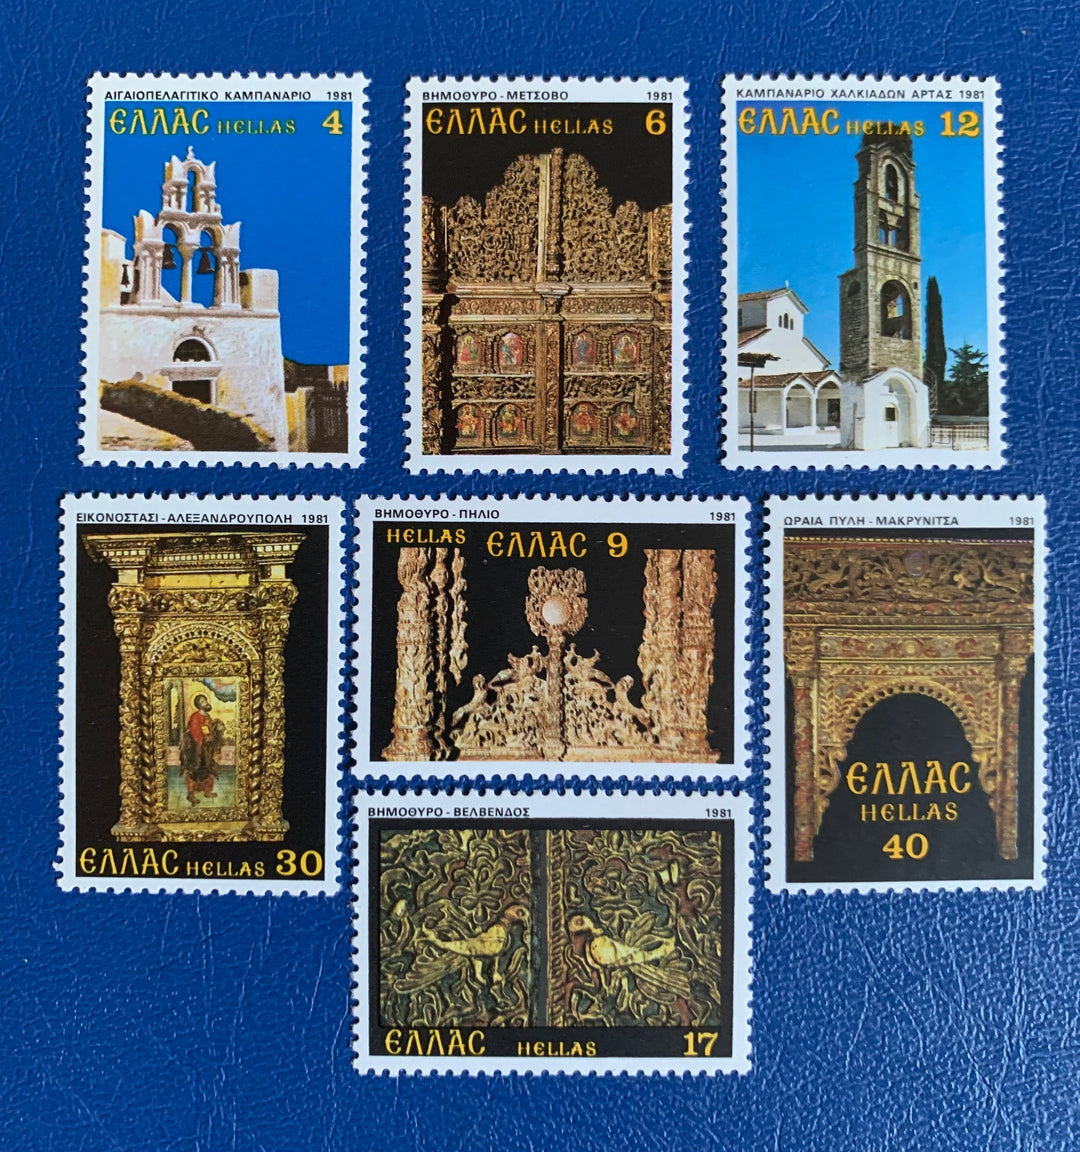 Greece - Original Vintage Postage Stamps- 1981 Bell Towers & Wooden Screens- for the collector, artist or collector